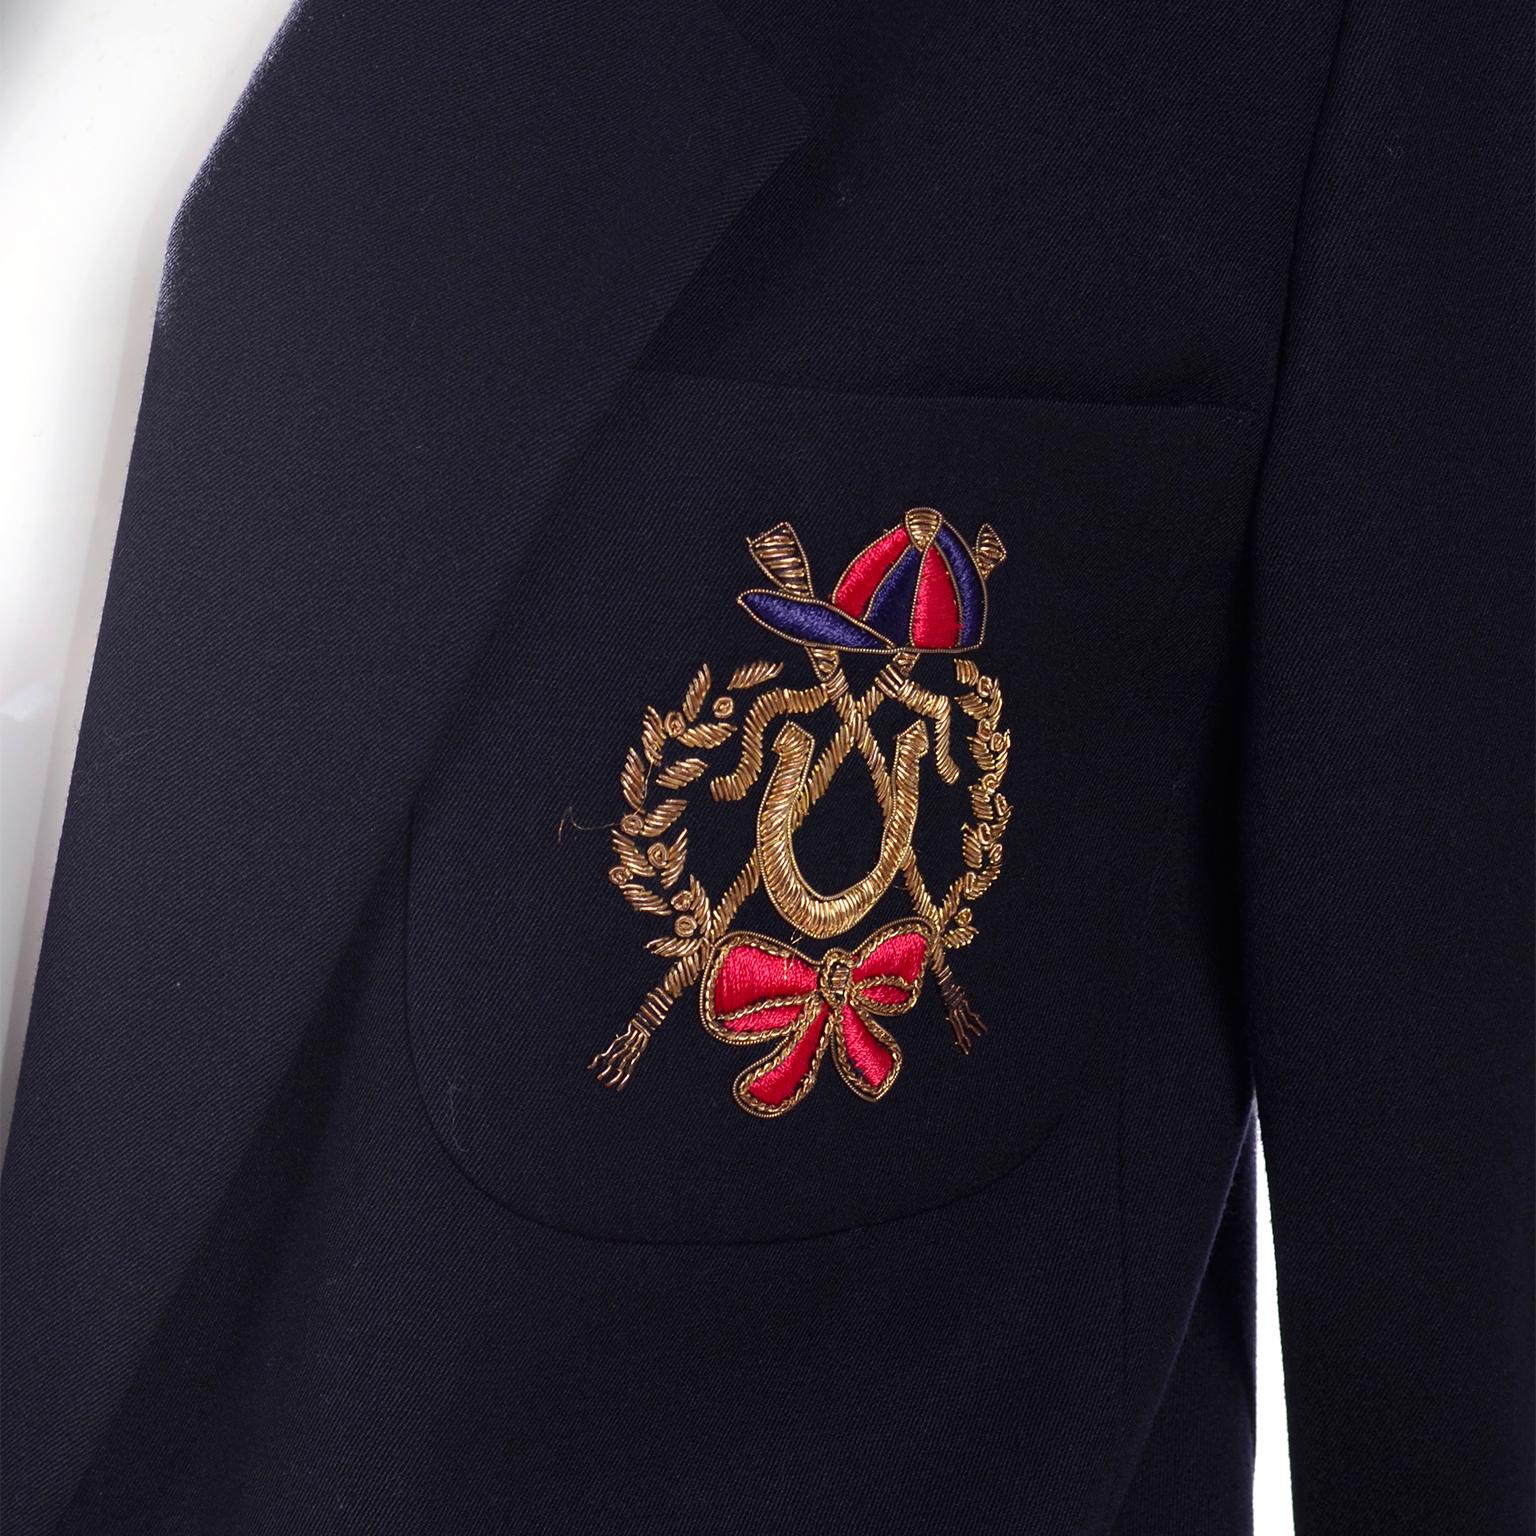 We love Escada! This vintage 1980's Escada blazer was designed by Margaretha Ley and it has so much style! This great Escada jacket closes with a single button and has a wonderful equestrian themed emblem patch sewn in. Labeled a vintage size 38, we